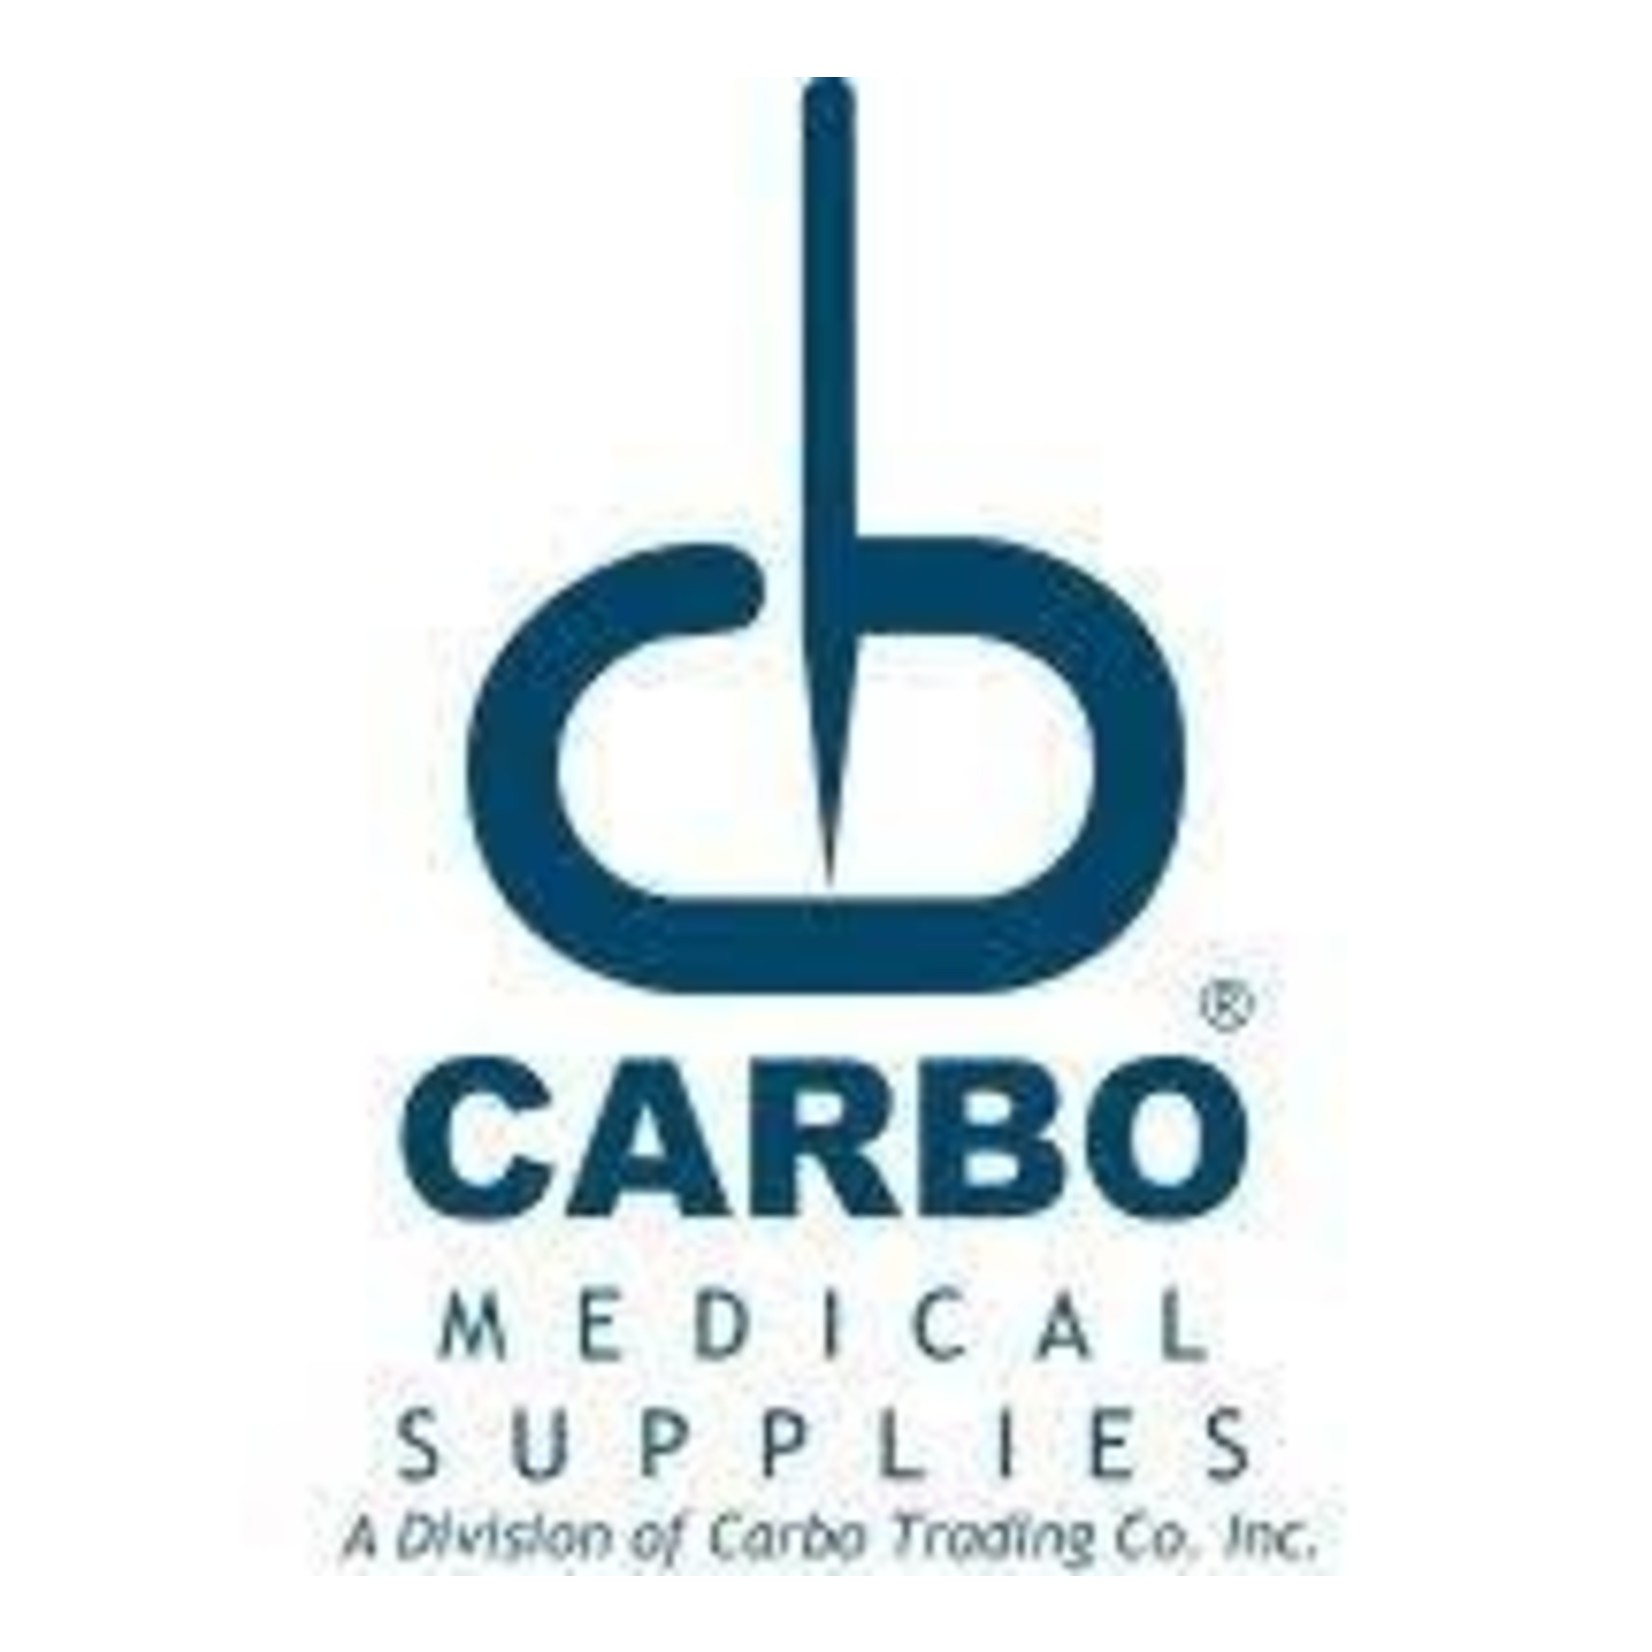 CARBO CARBO ACUPUNCTURE NEEDLE (NO TUBE) .14 x 13mm